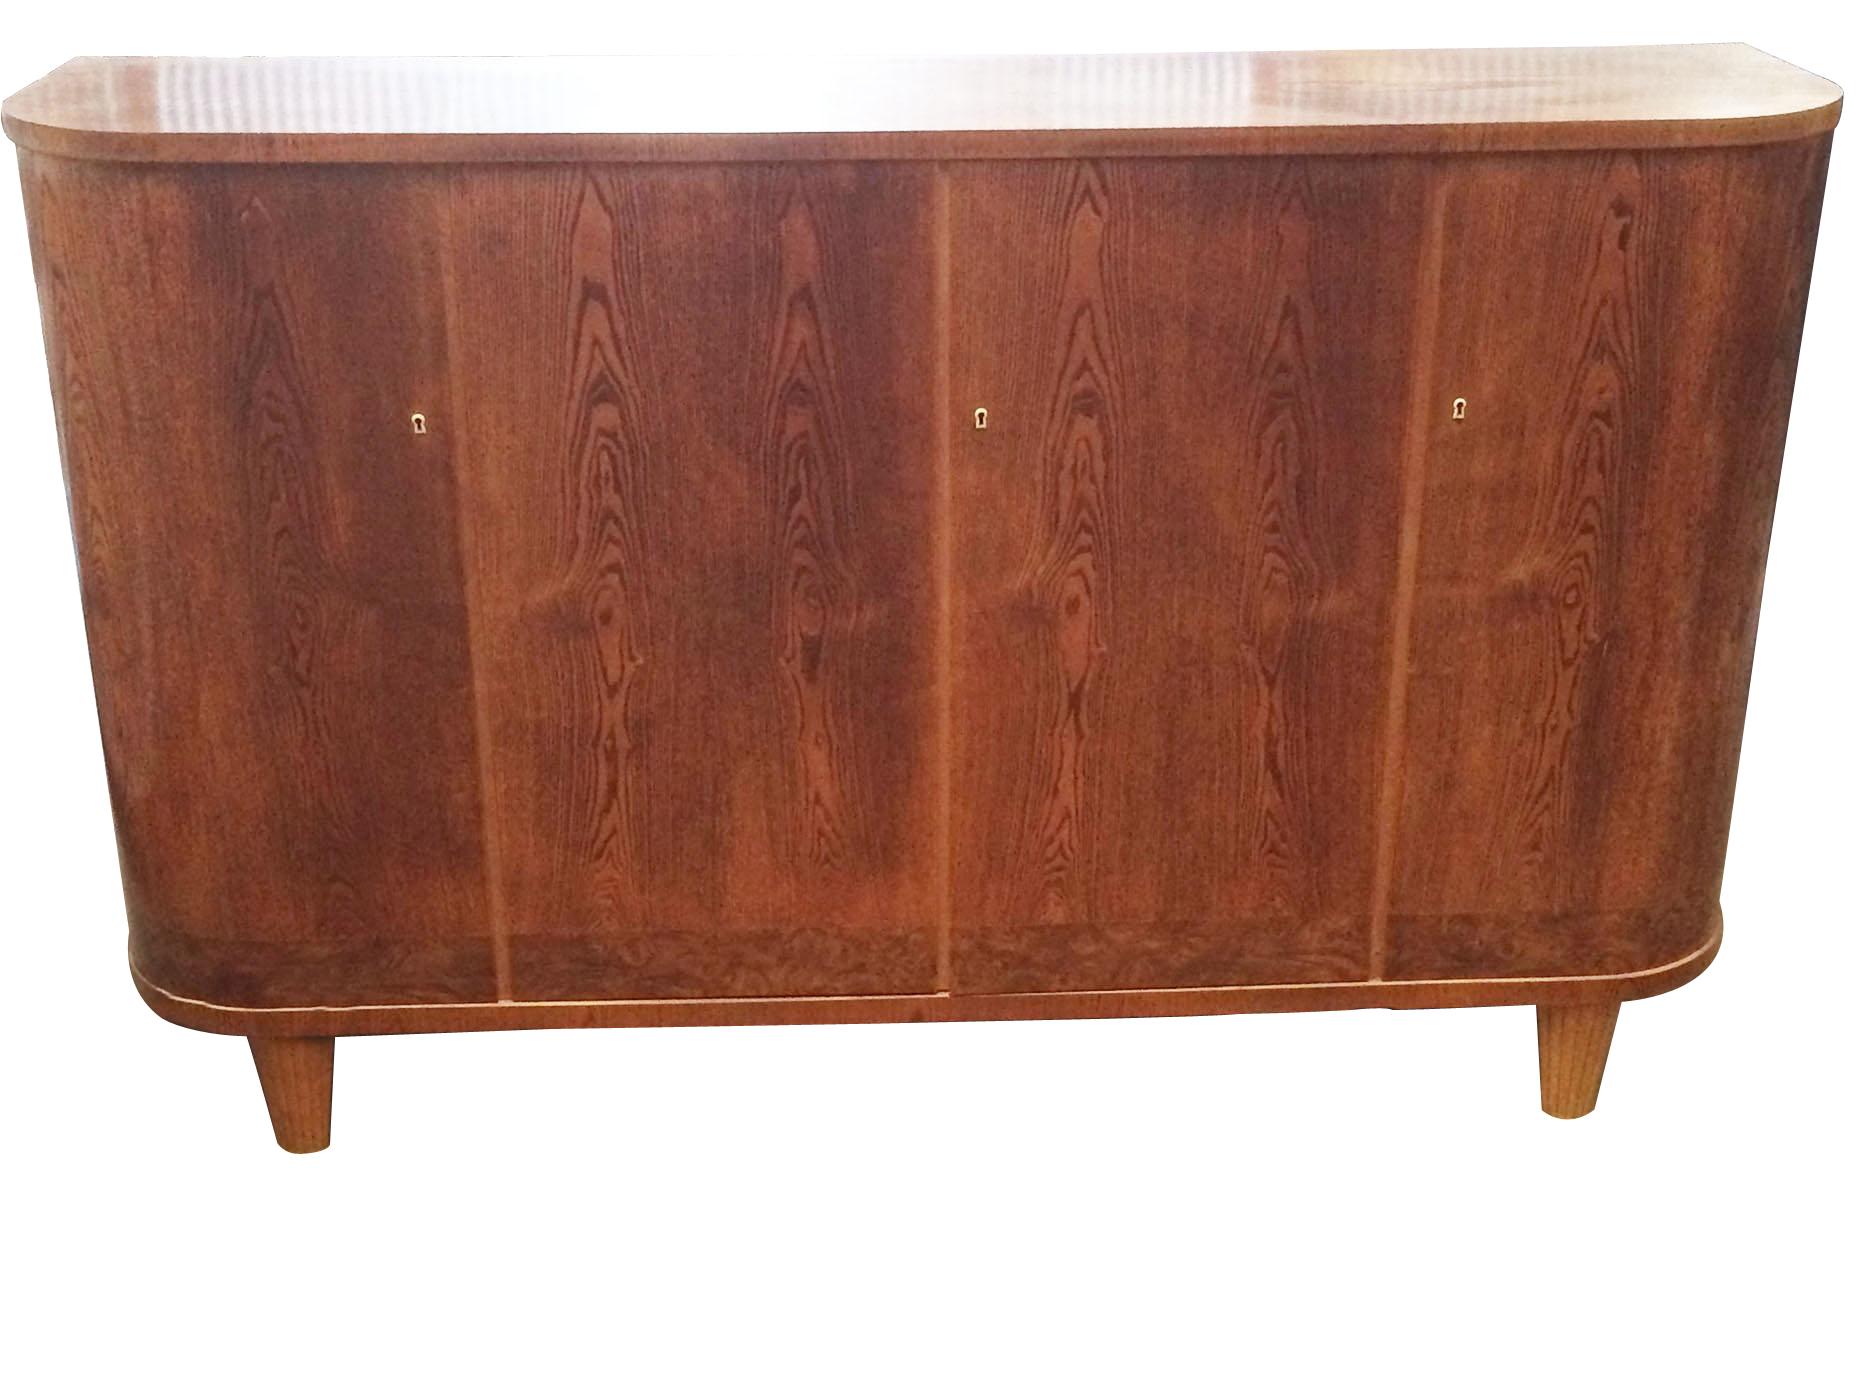 An exception late Art Deco or midcentury birch sideboard or cabinet. The sideboard has curved, ¼ circle ends and fluted. Tapered legs and white celluloid escutcheons for the 3 key holes. Interior has 2 interior shelves.
Dimensions: 45cm deep x